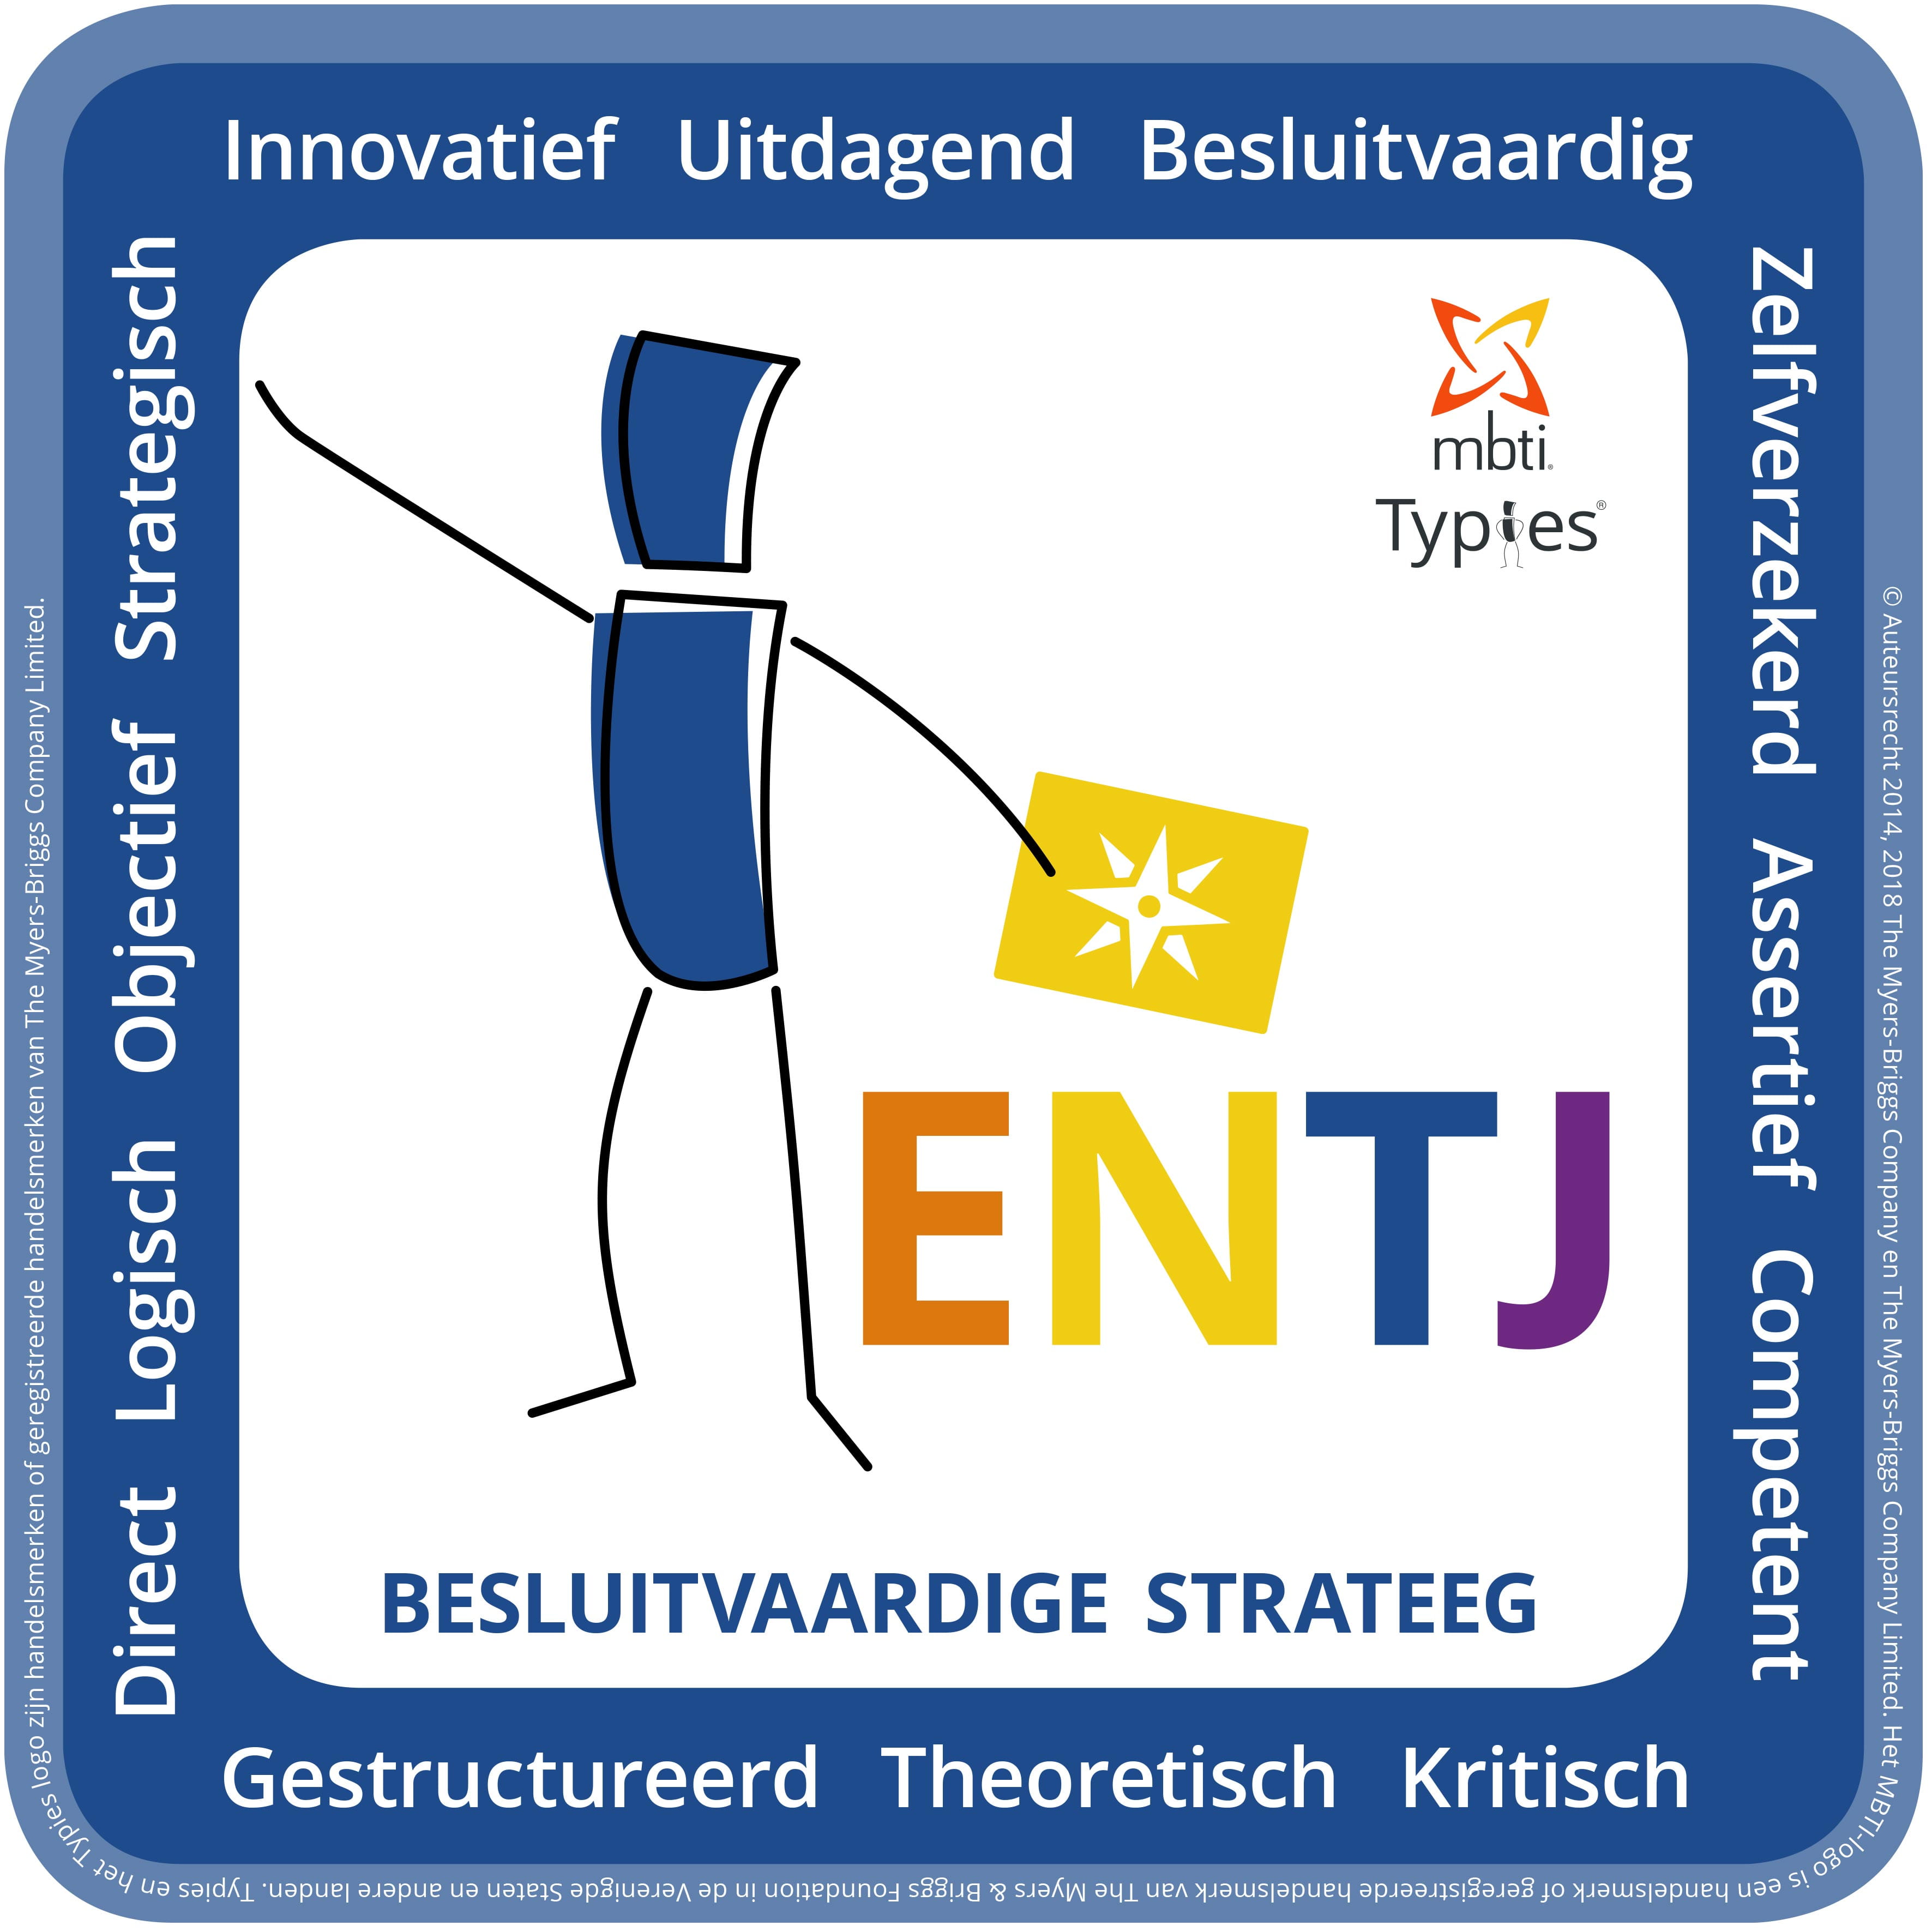 Typical characteristics of an ENTJ